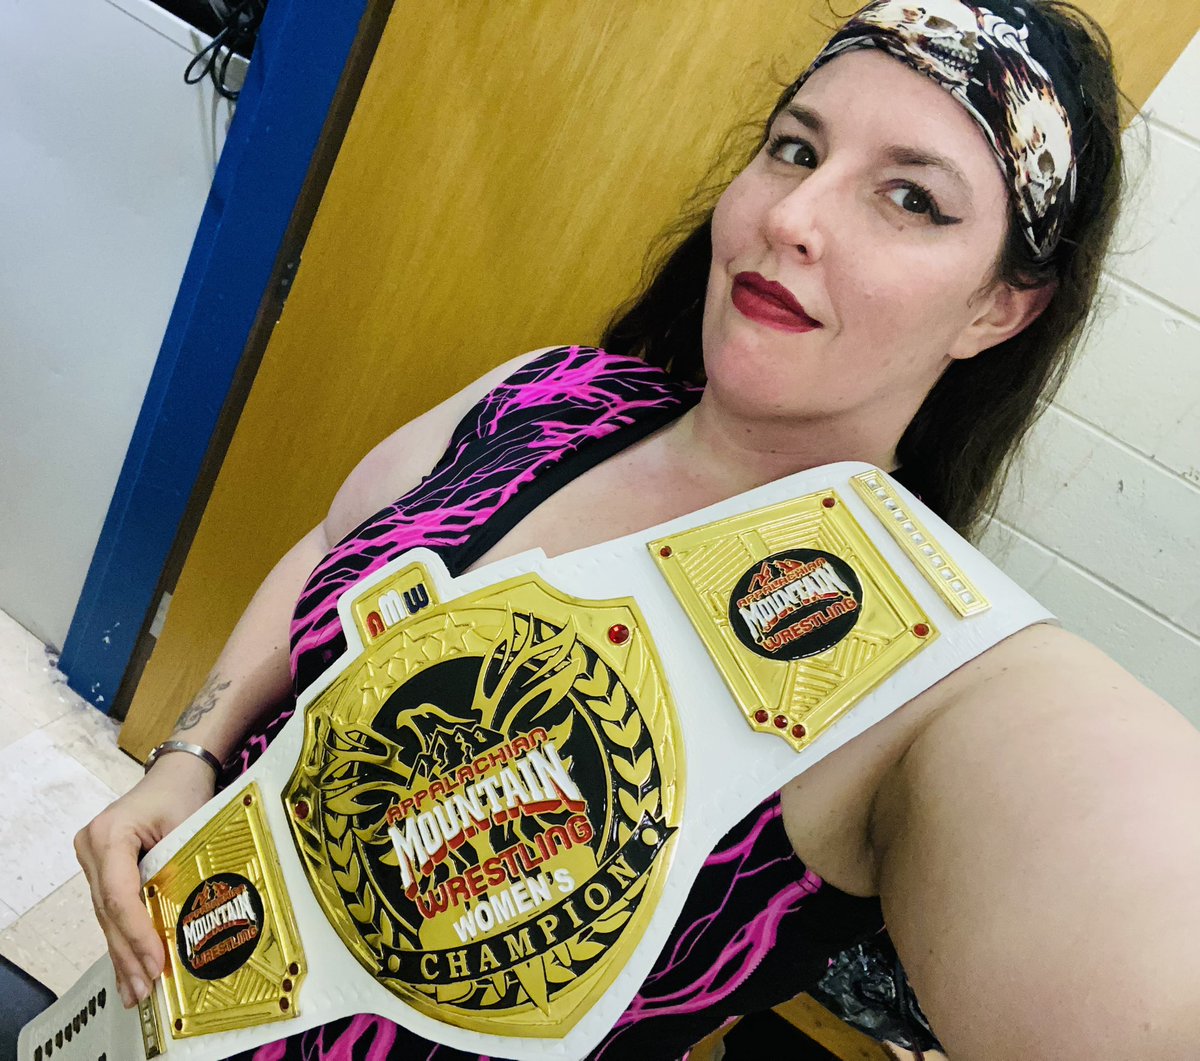 Buckle up baby-Appalachian Mountain Wrestling you are in Big Mama’s house now, and this isn’t going anywhere without a butt whooping’! #womenswrestling #inaugural #thefirst #1womanrevoultion